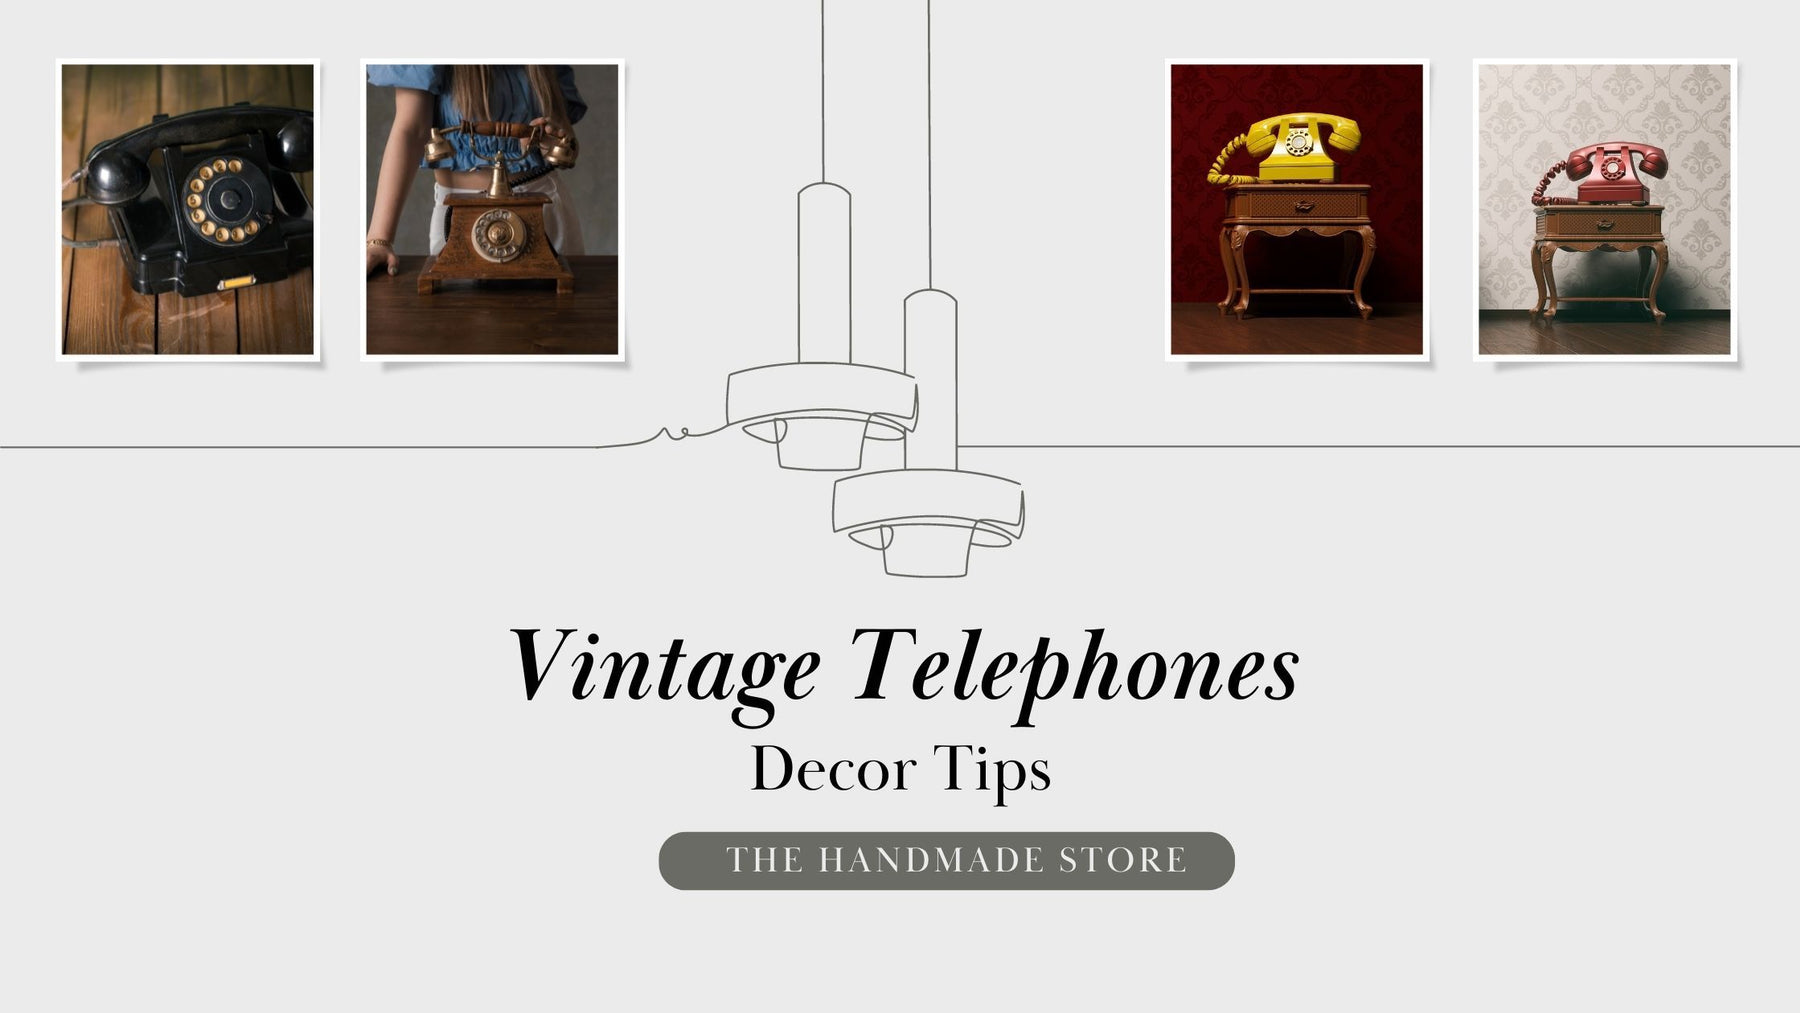 5 Tips To Decorate A Home With A Vintage Telephone - The Handmade Store